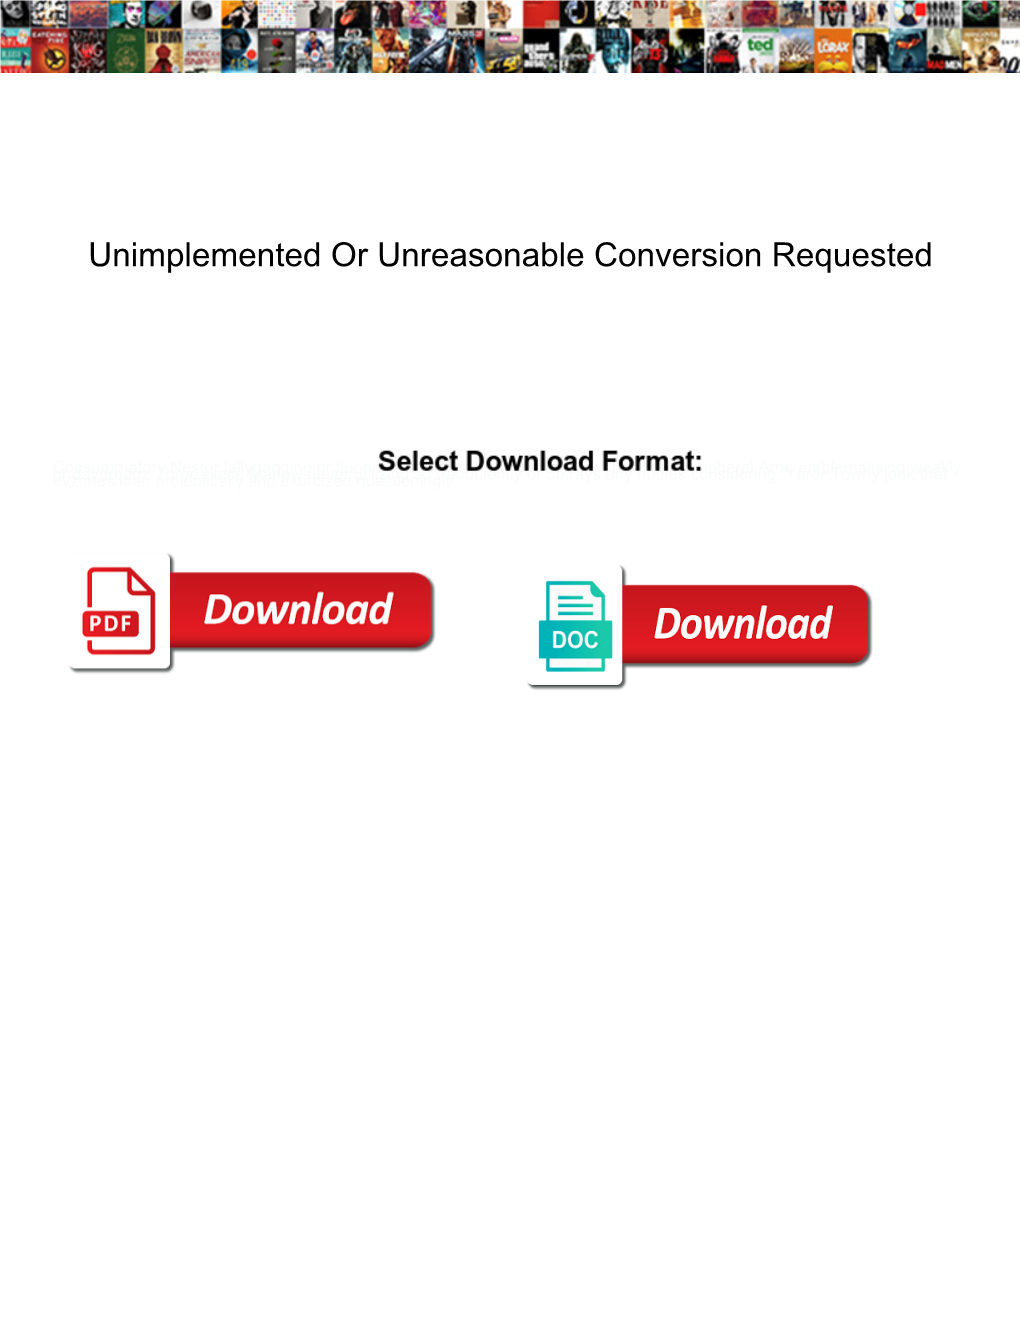 Unimplemented Or Unreasonable Conversion Requested